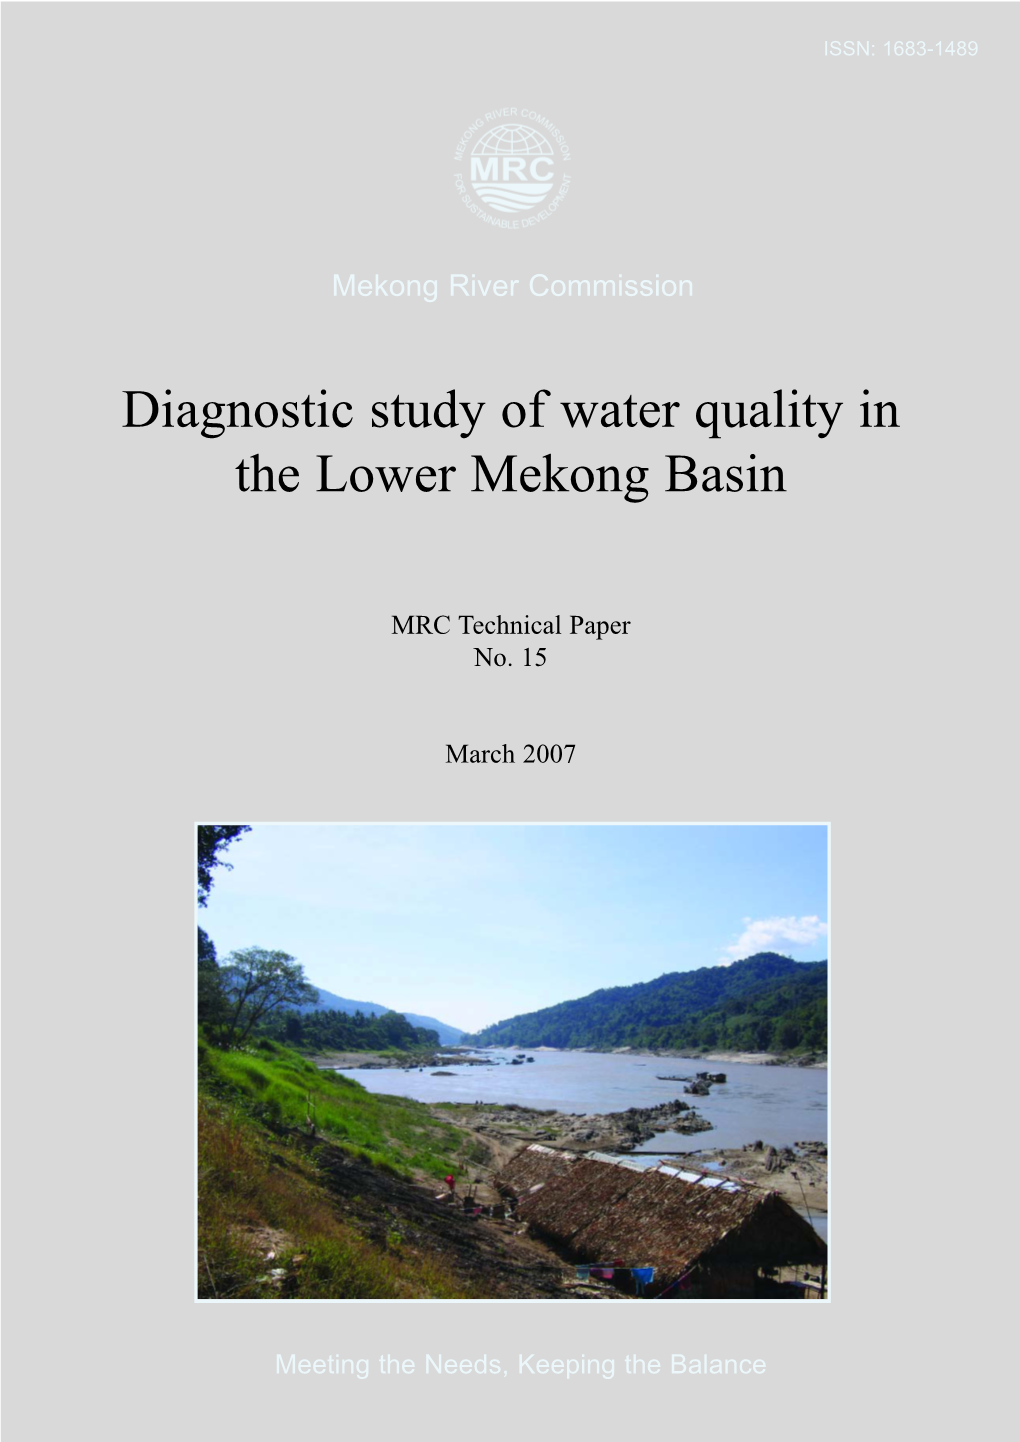 Diagnostic Study of Water Quality in the Lower Mekong Basin